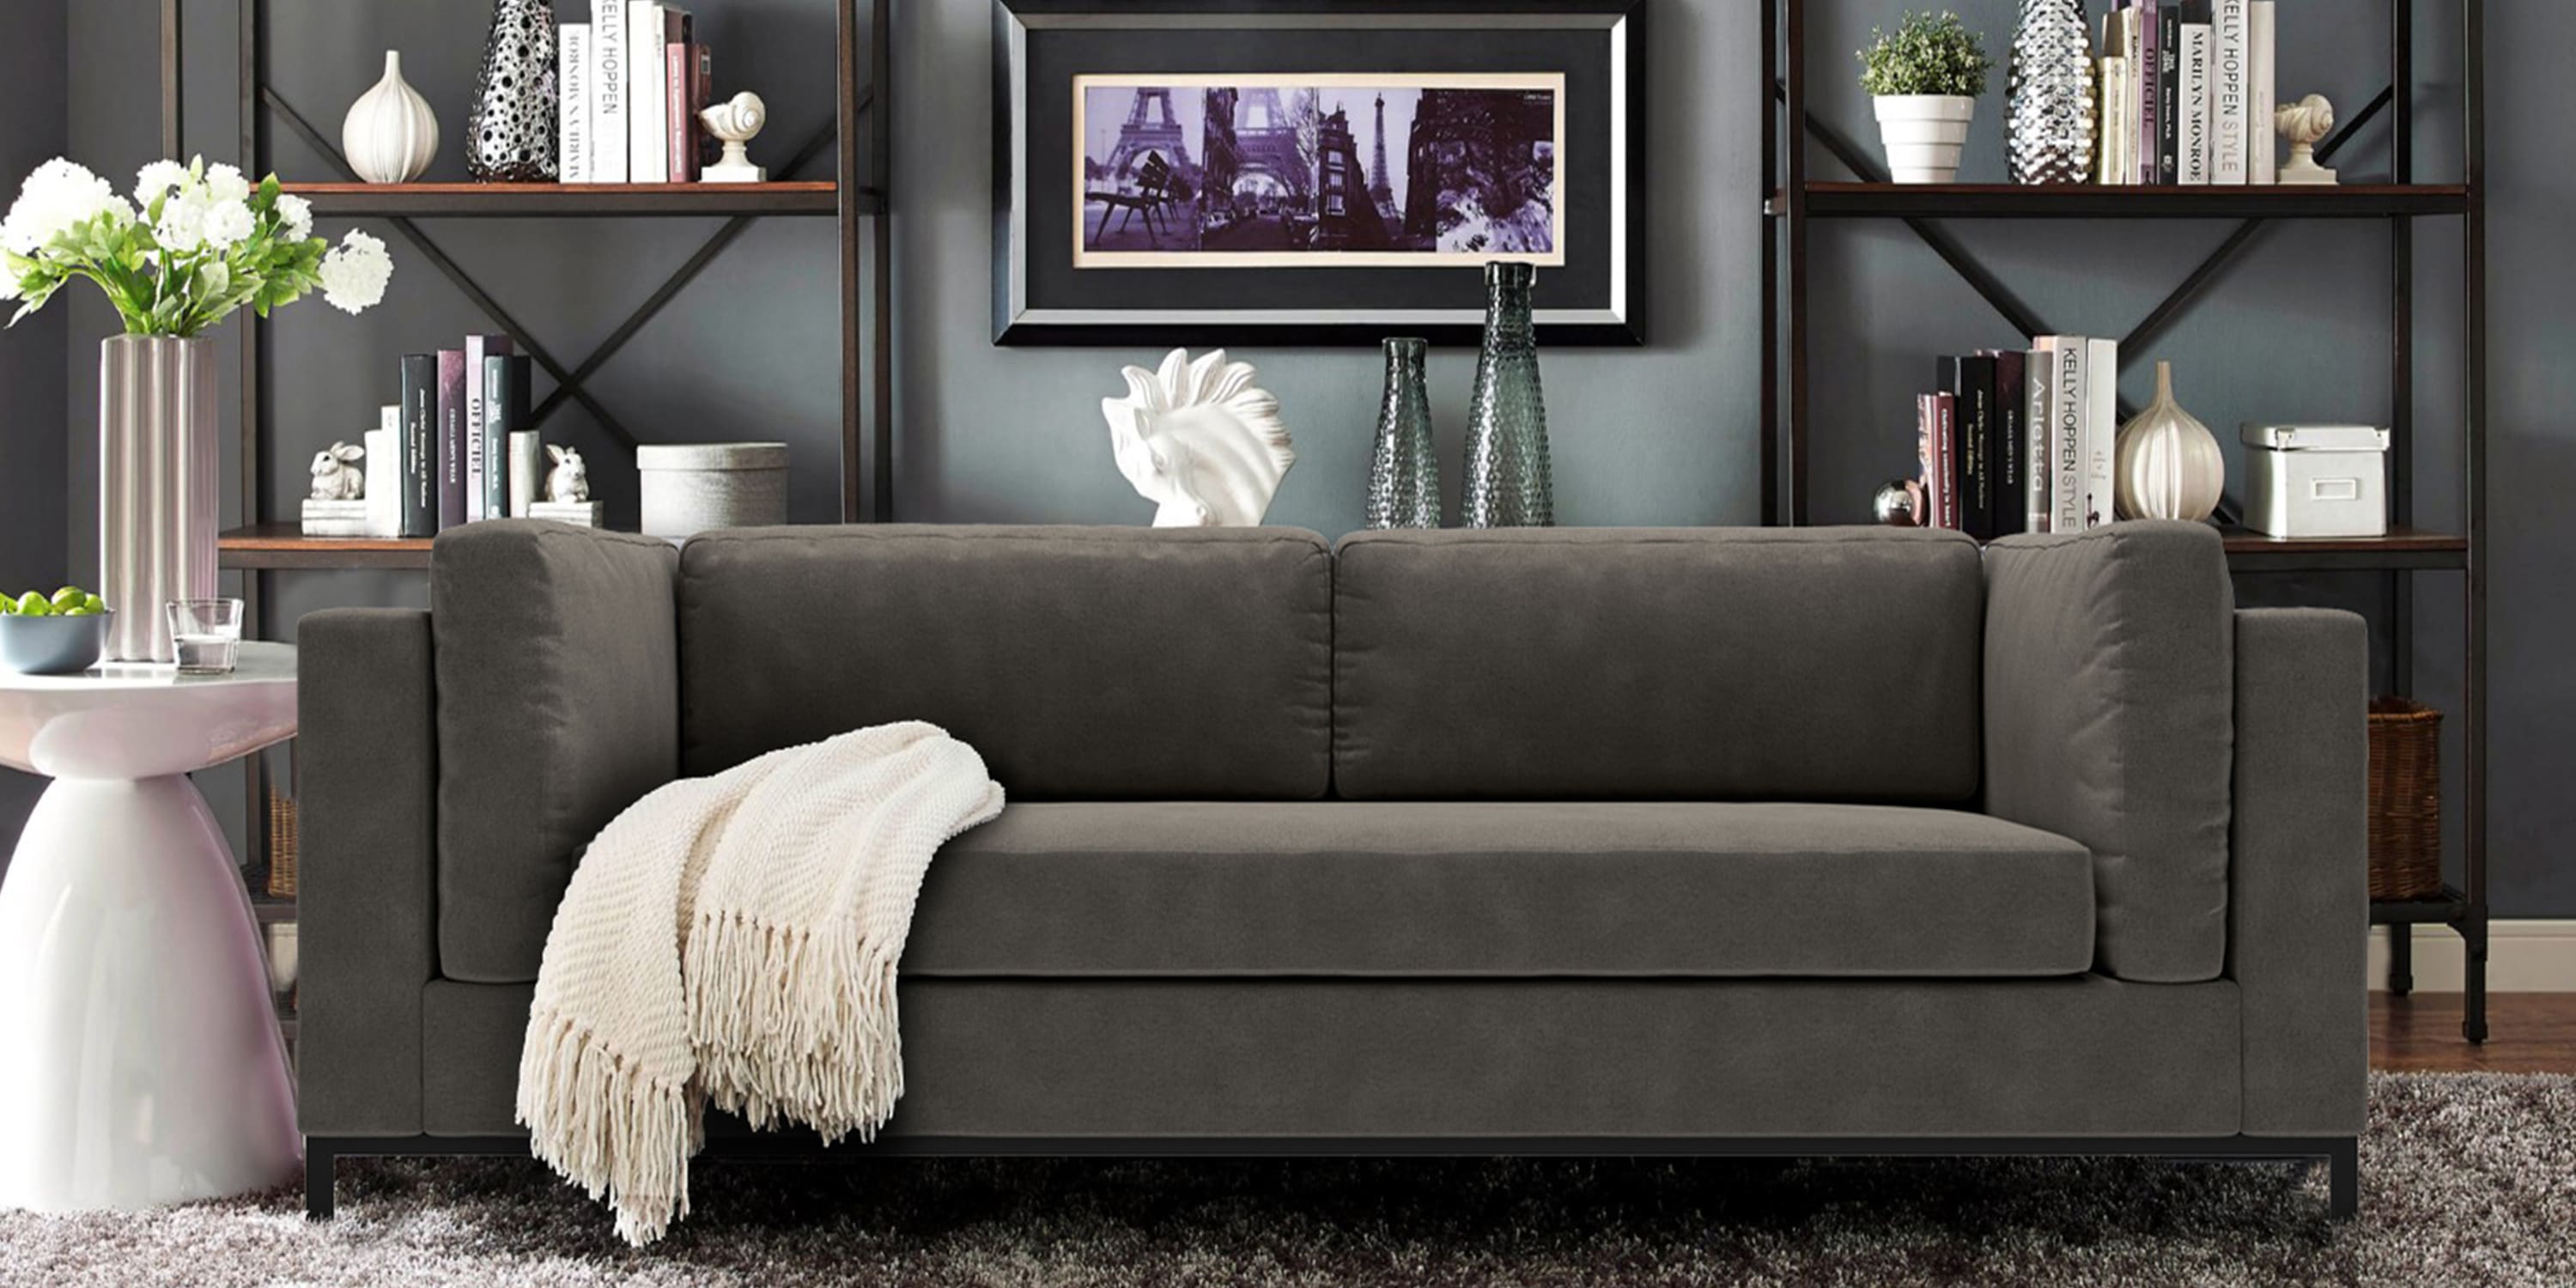 10 Best Canadian Made Sofas To Check, Best Canadian Made Leather Sofas